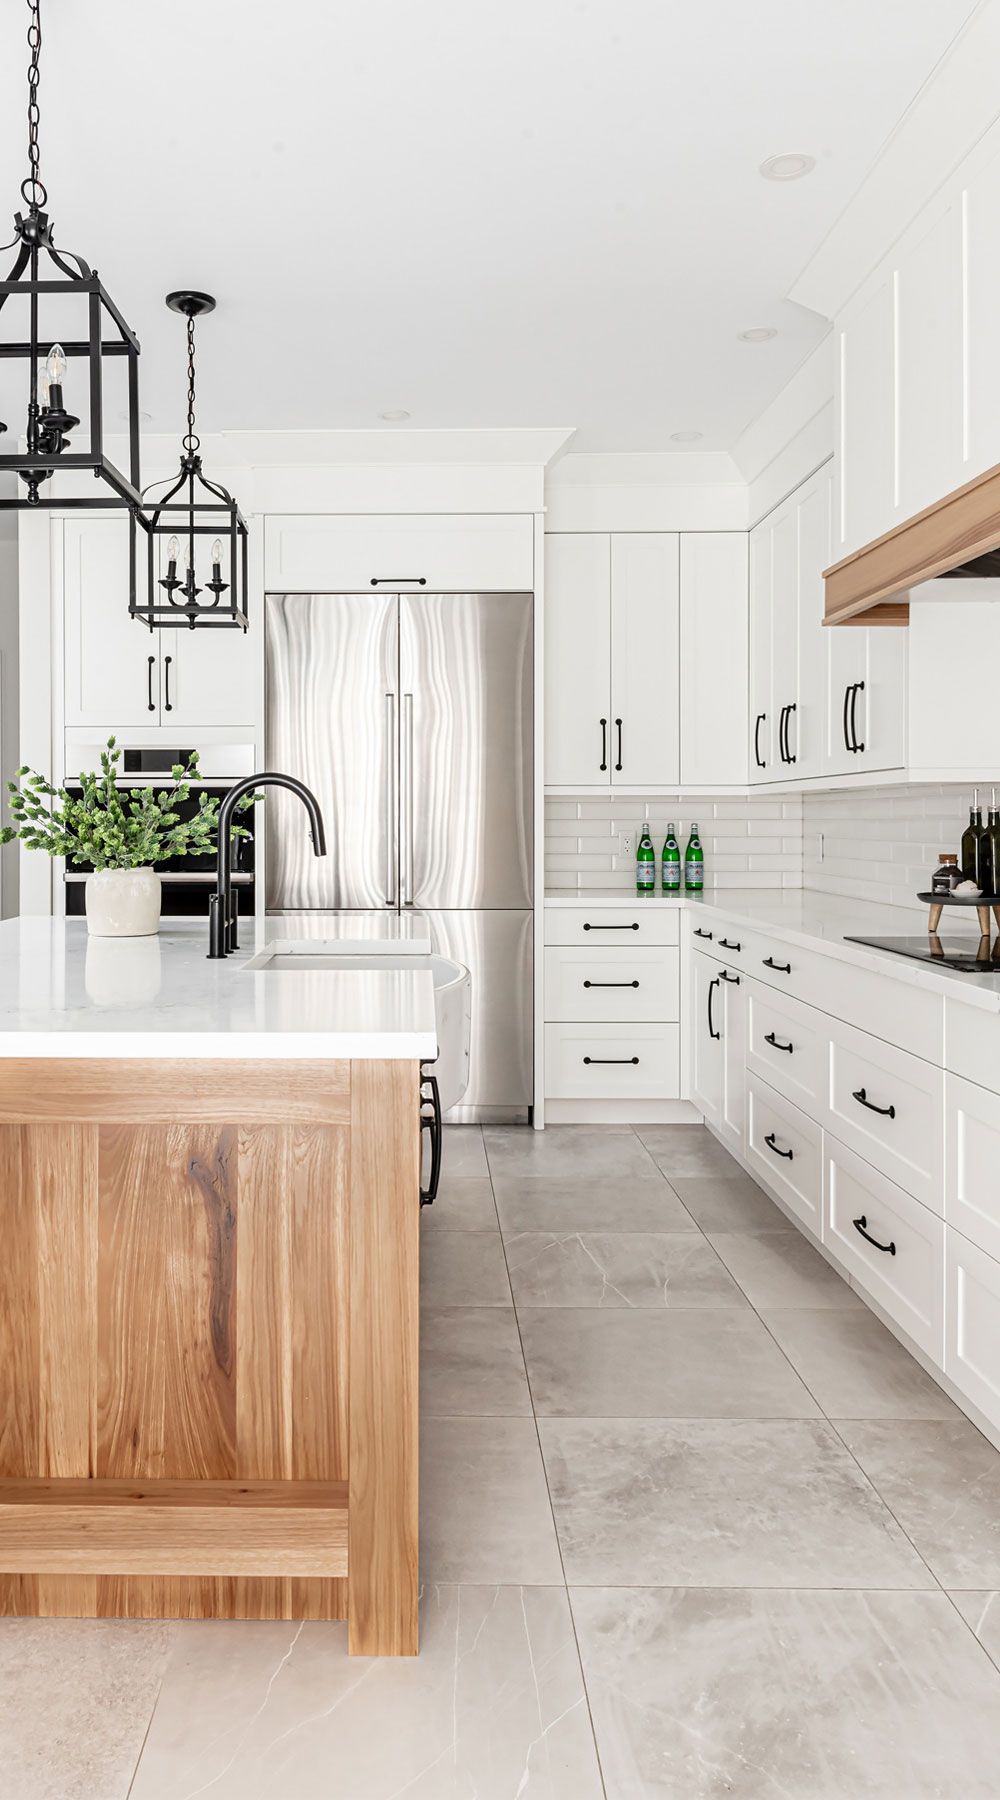 White Kitchen Cabinets: The Best Storage Option For Your Kitchen